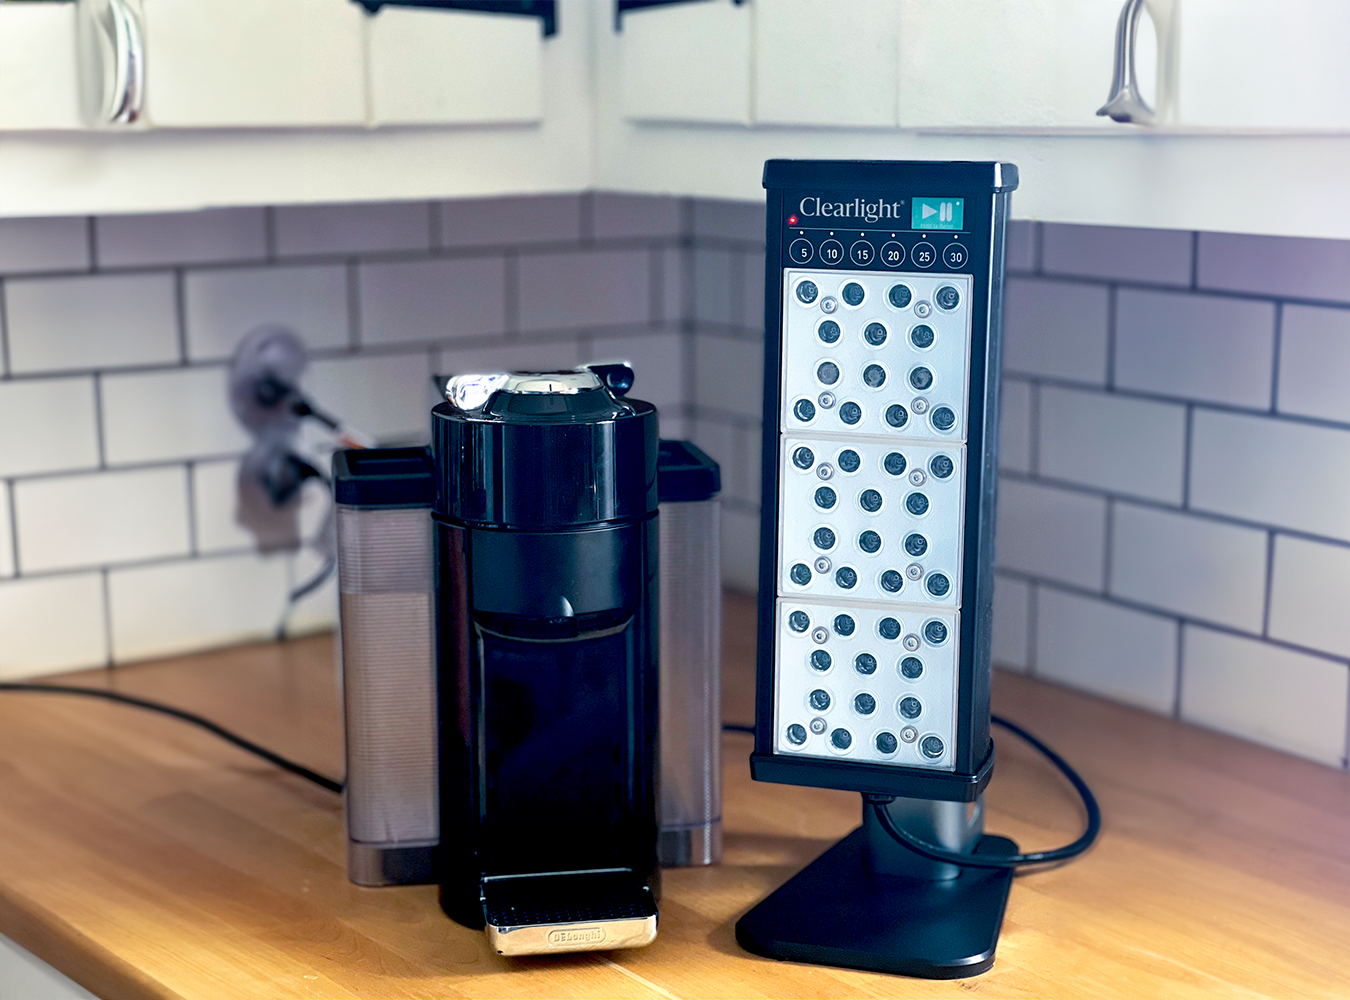 Black PERSONAL Tower sitting on a kitchen counter next to a coffee maker.